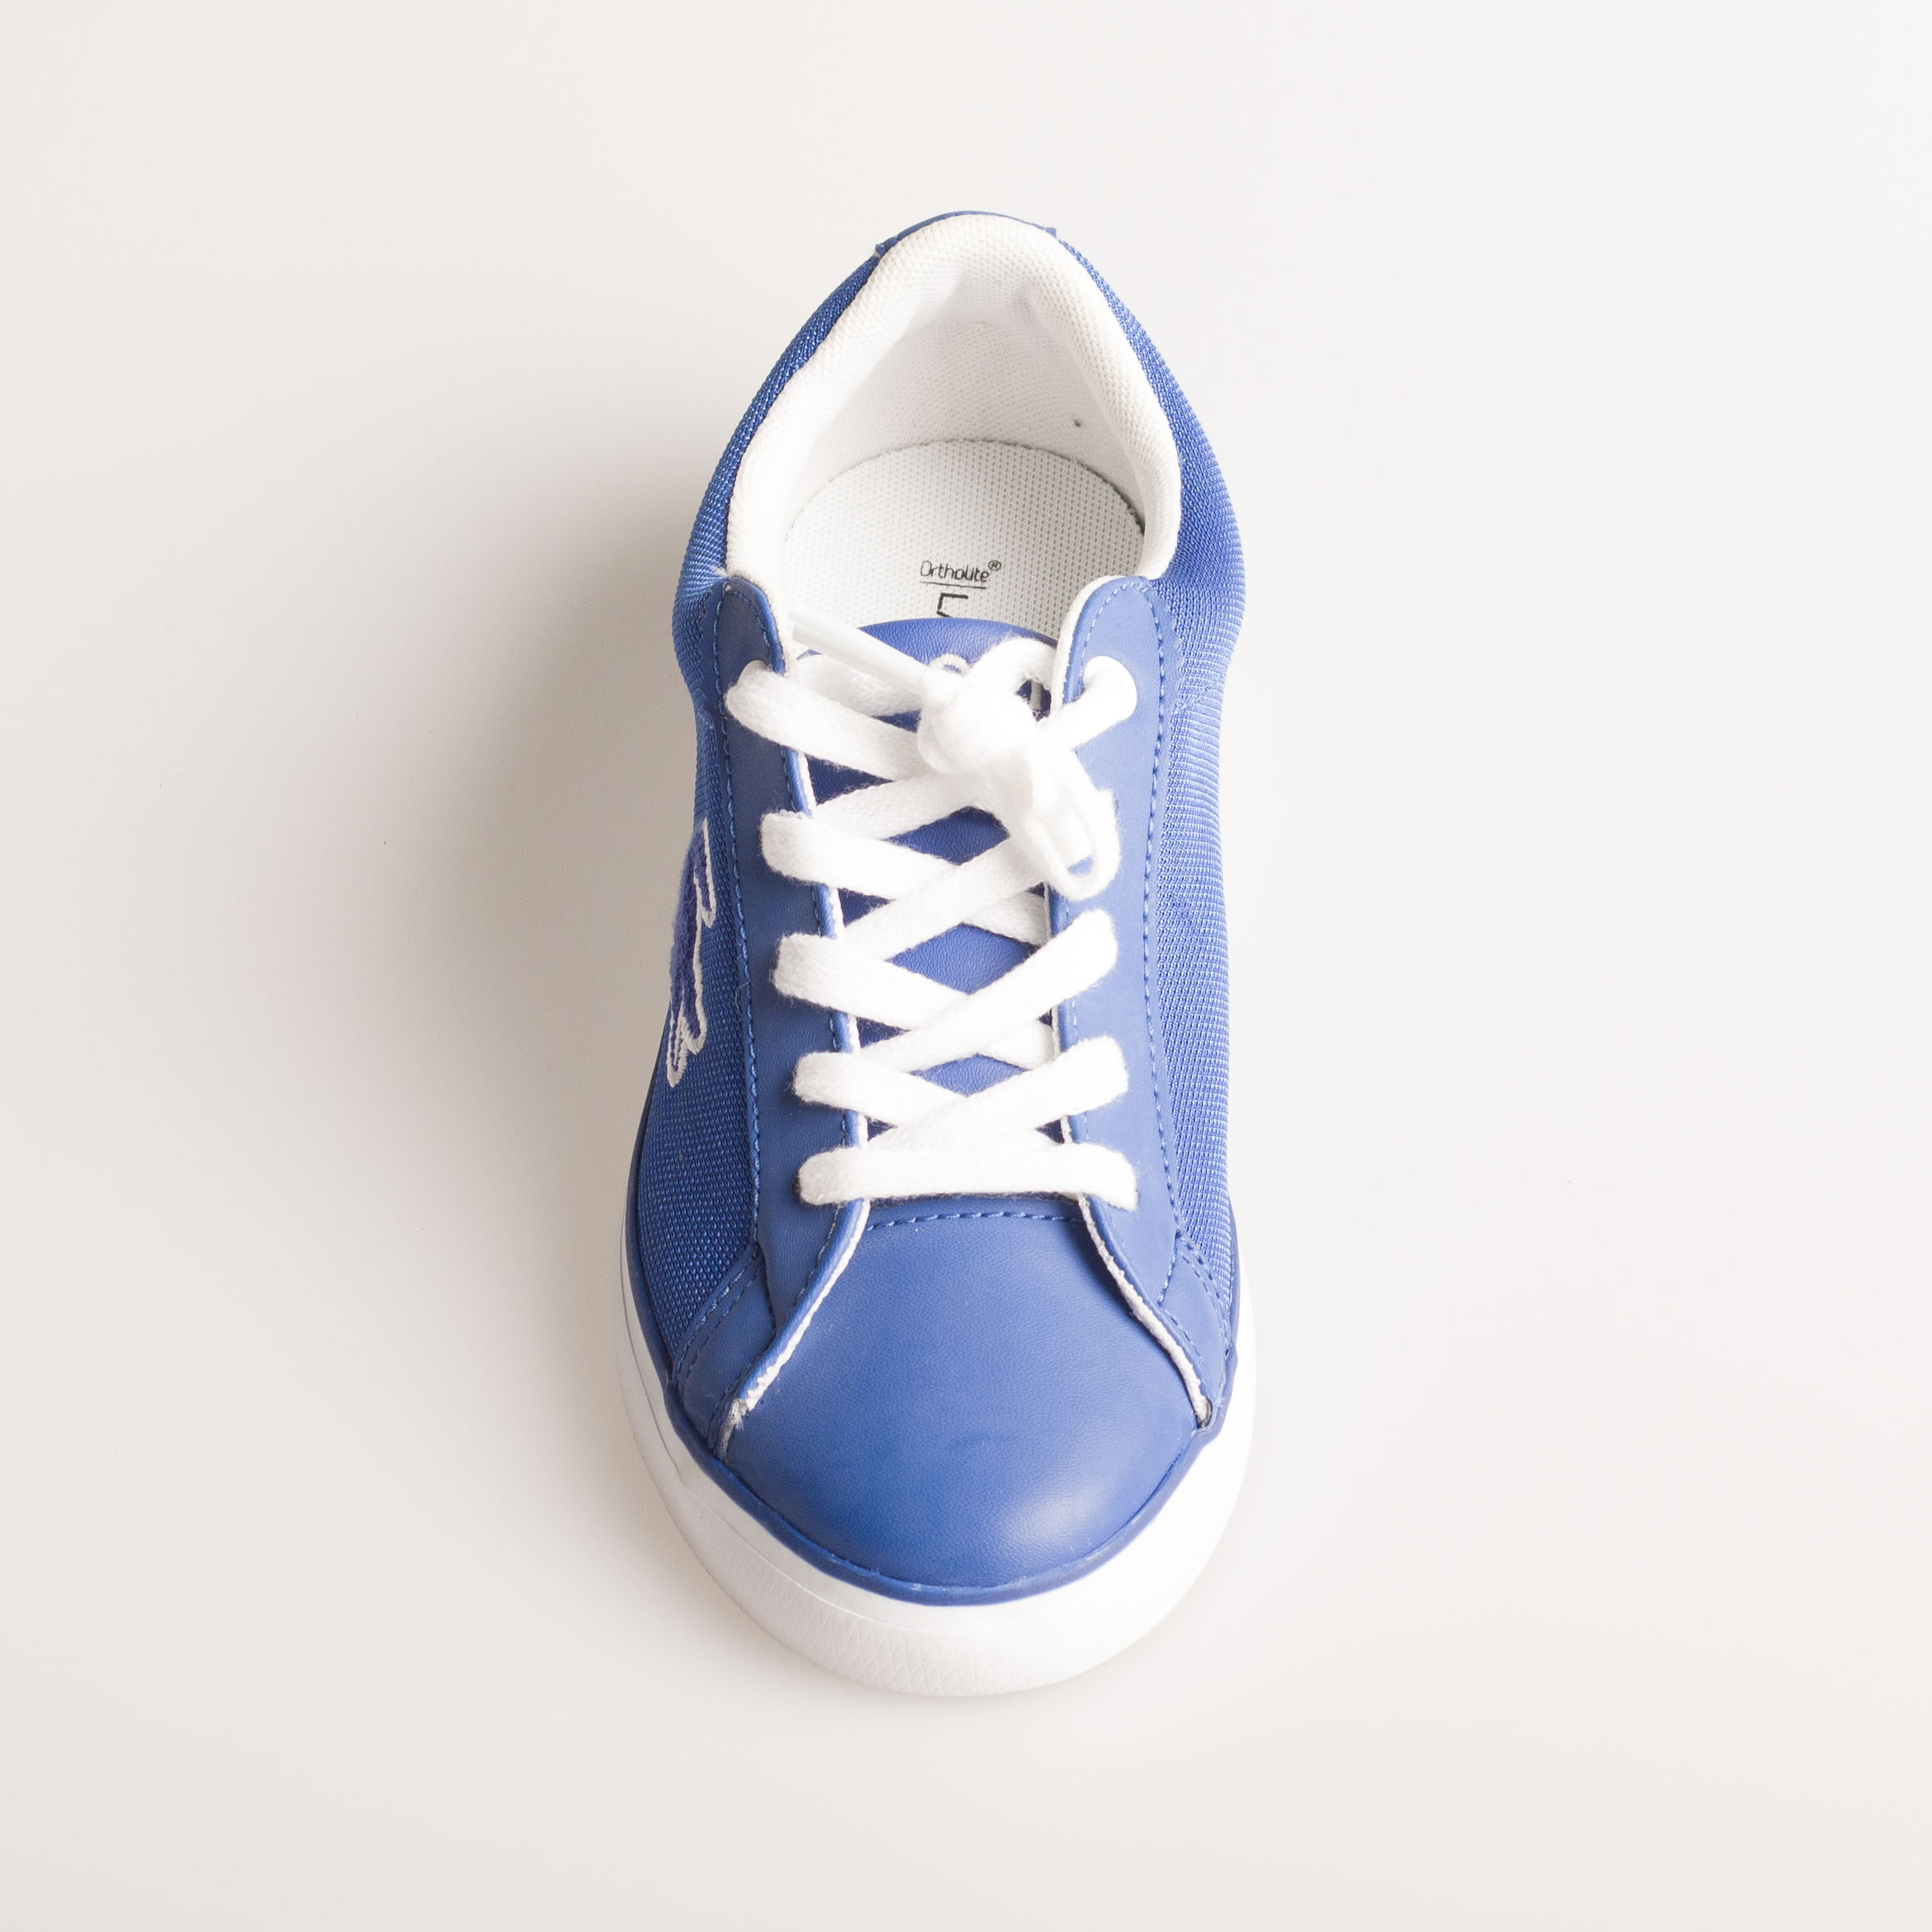 lacoste childrens trainers